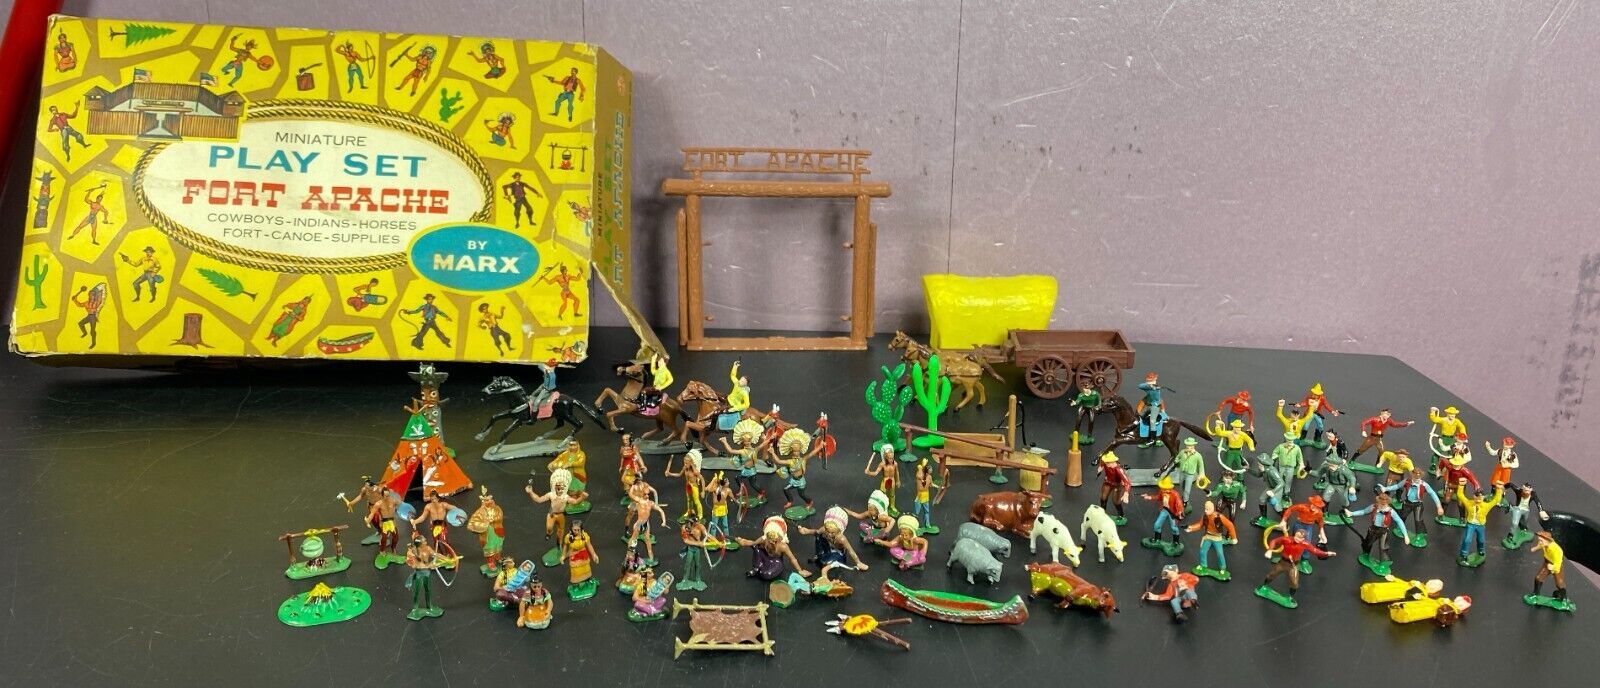 Fort Apache Marx Miniature Play Set Vintage 1950s NM in Box - $405.90